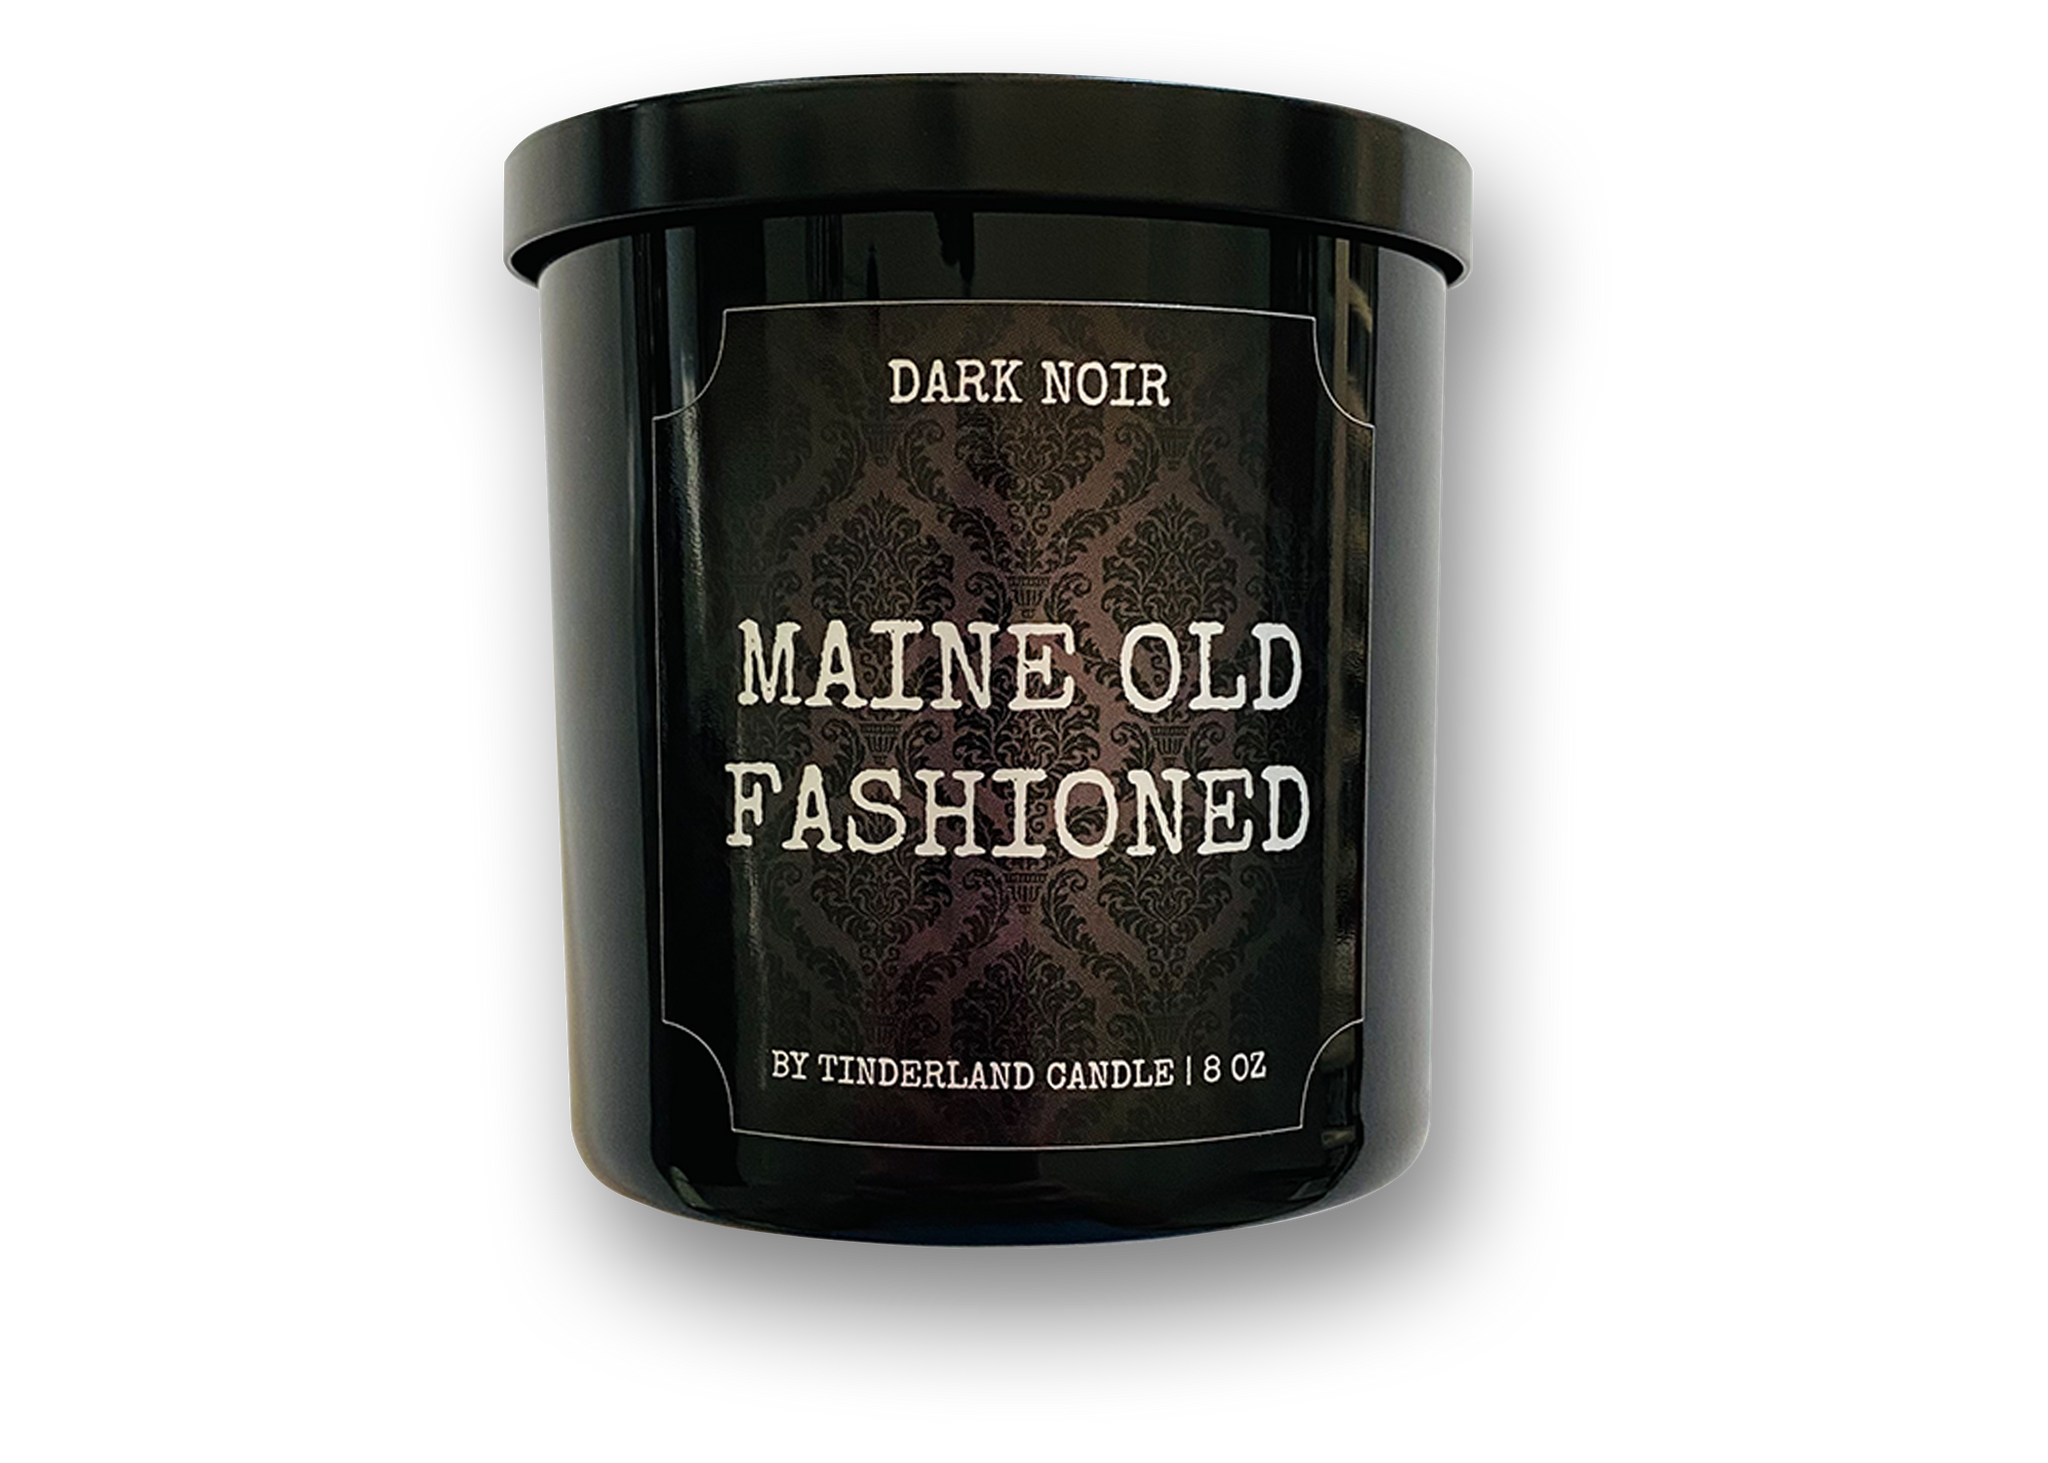 Maine Old Fashioned Dark Noir Candle